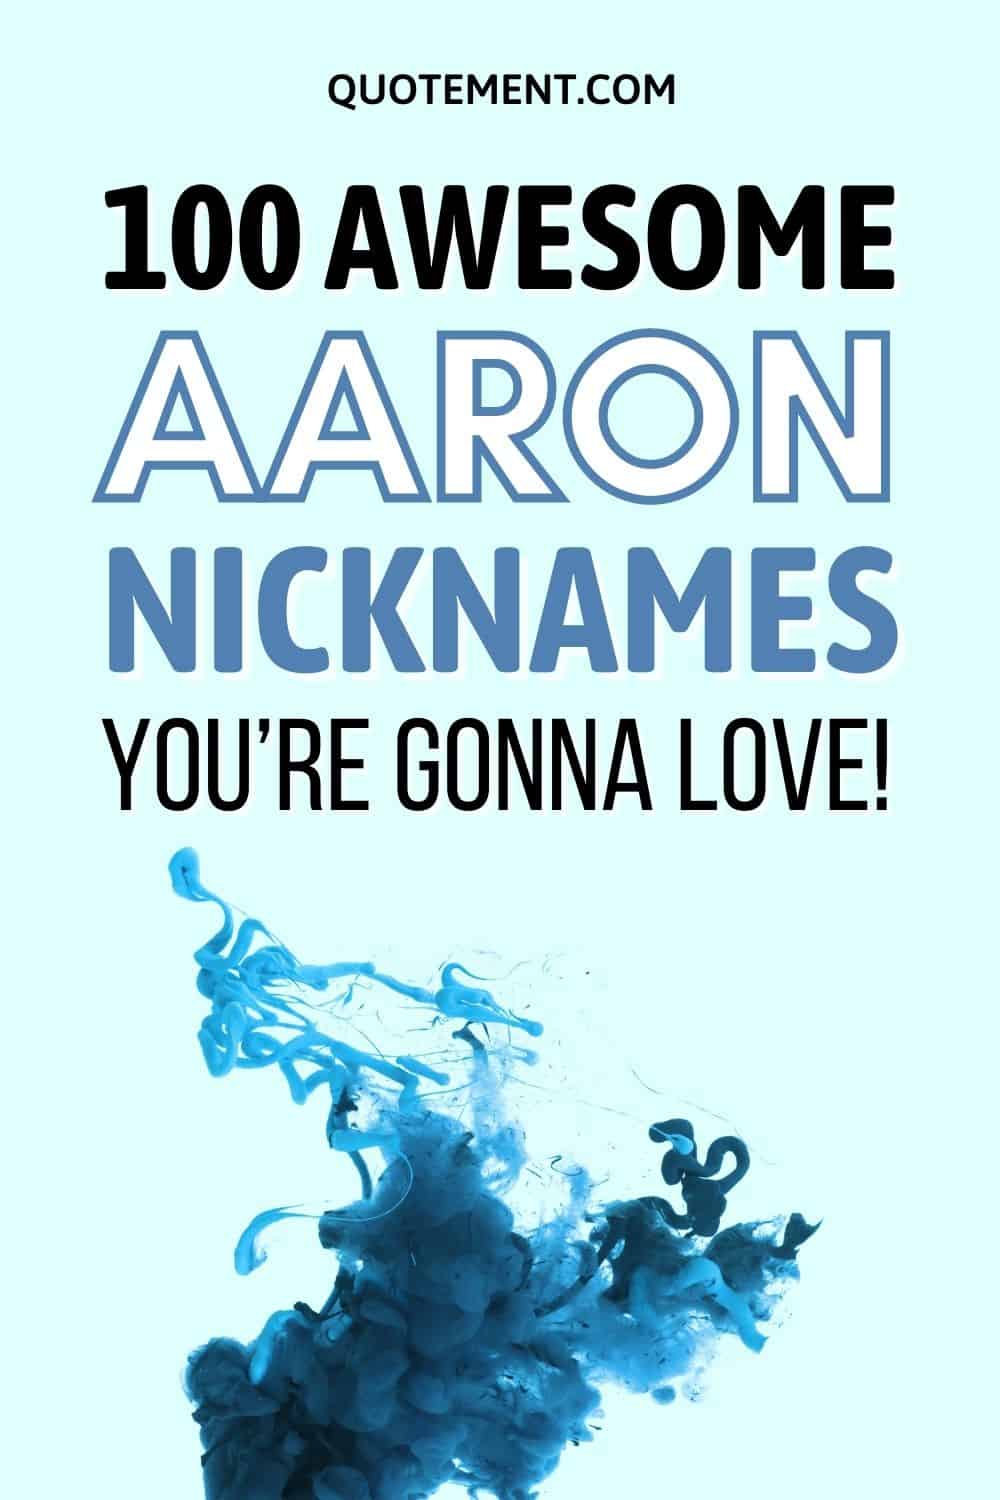 100 + Awesome Nicknames For Aaron You’re Gonna Love